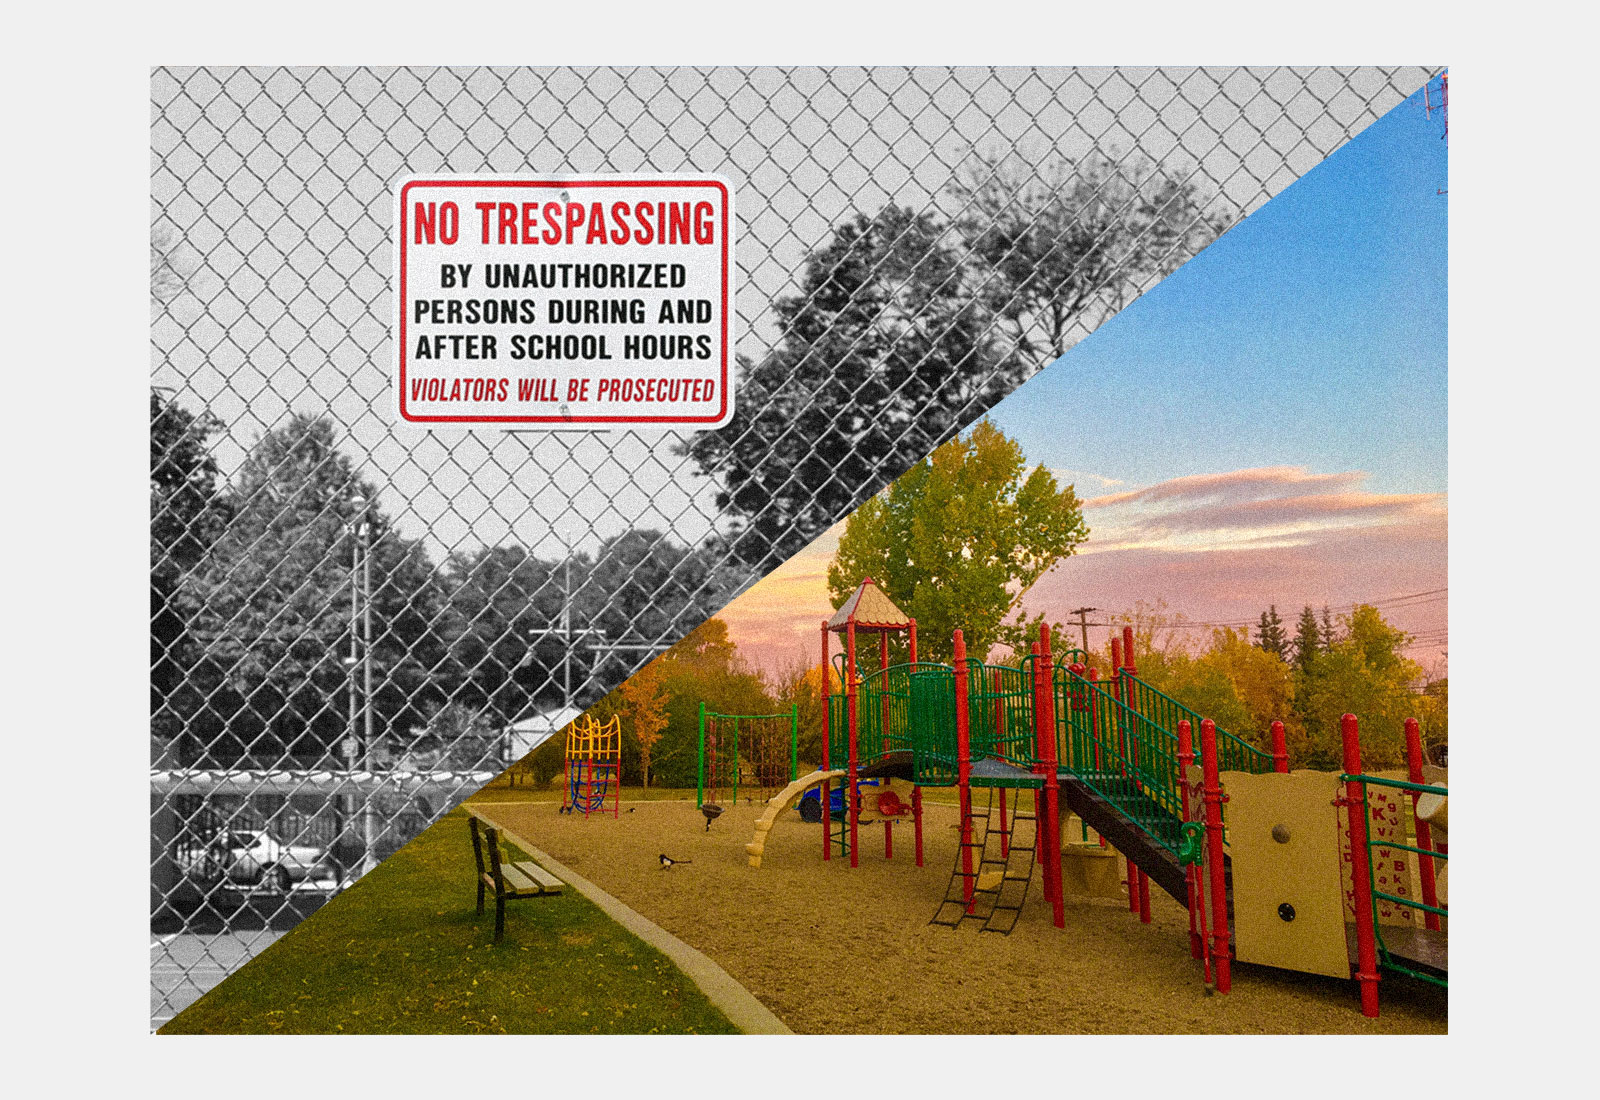 Split view of a schoolyard with a no trespassing sign and a parklike schoolyard